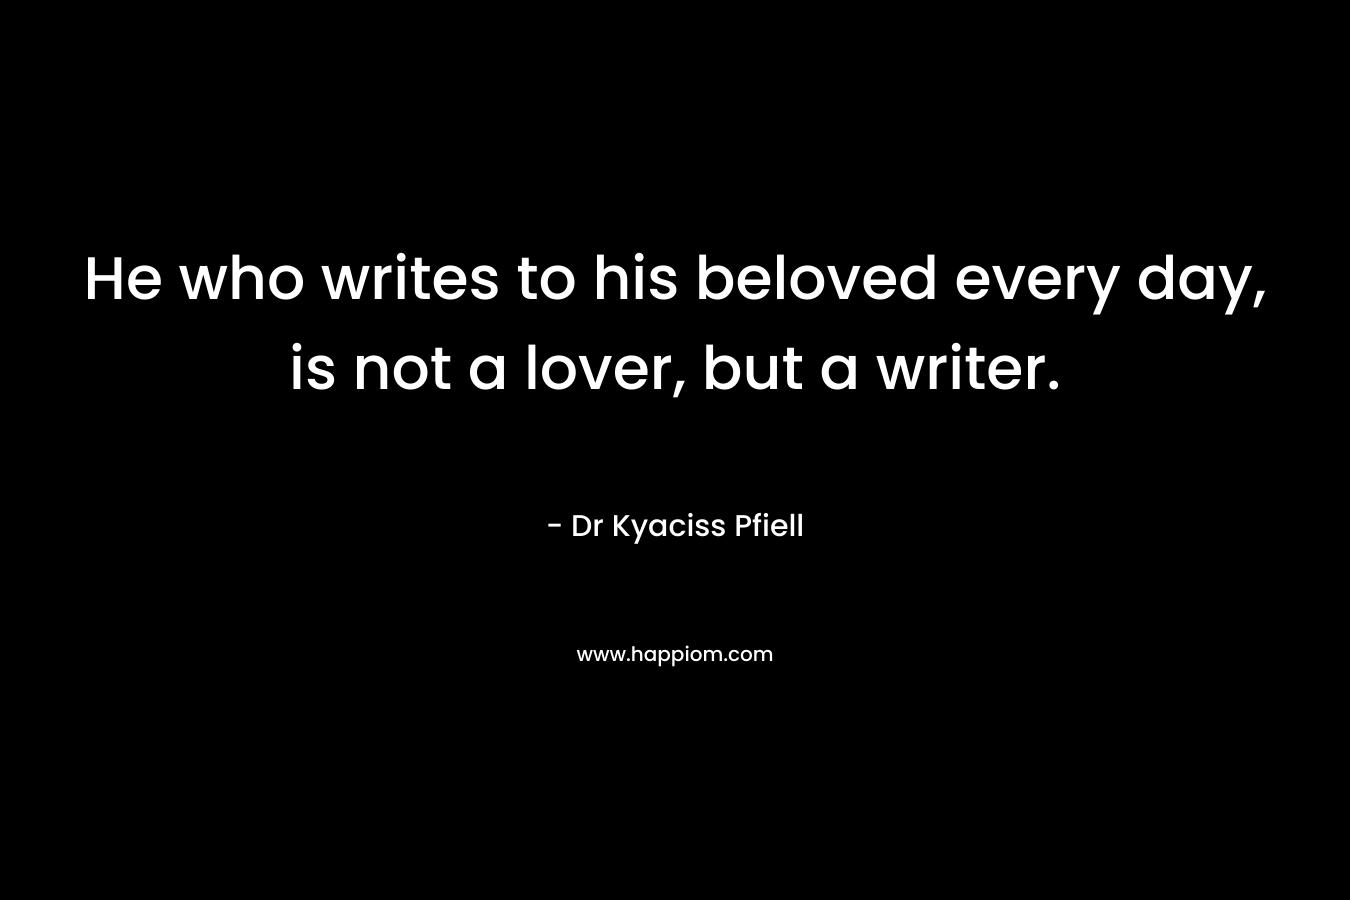 He who writes to his beloved every day, is not a lover, but a writer.